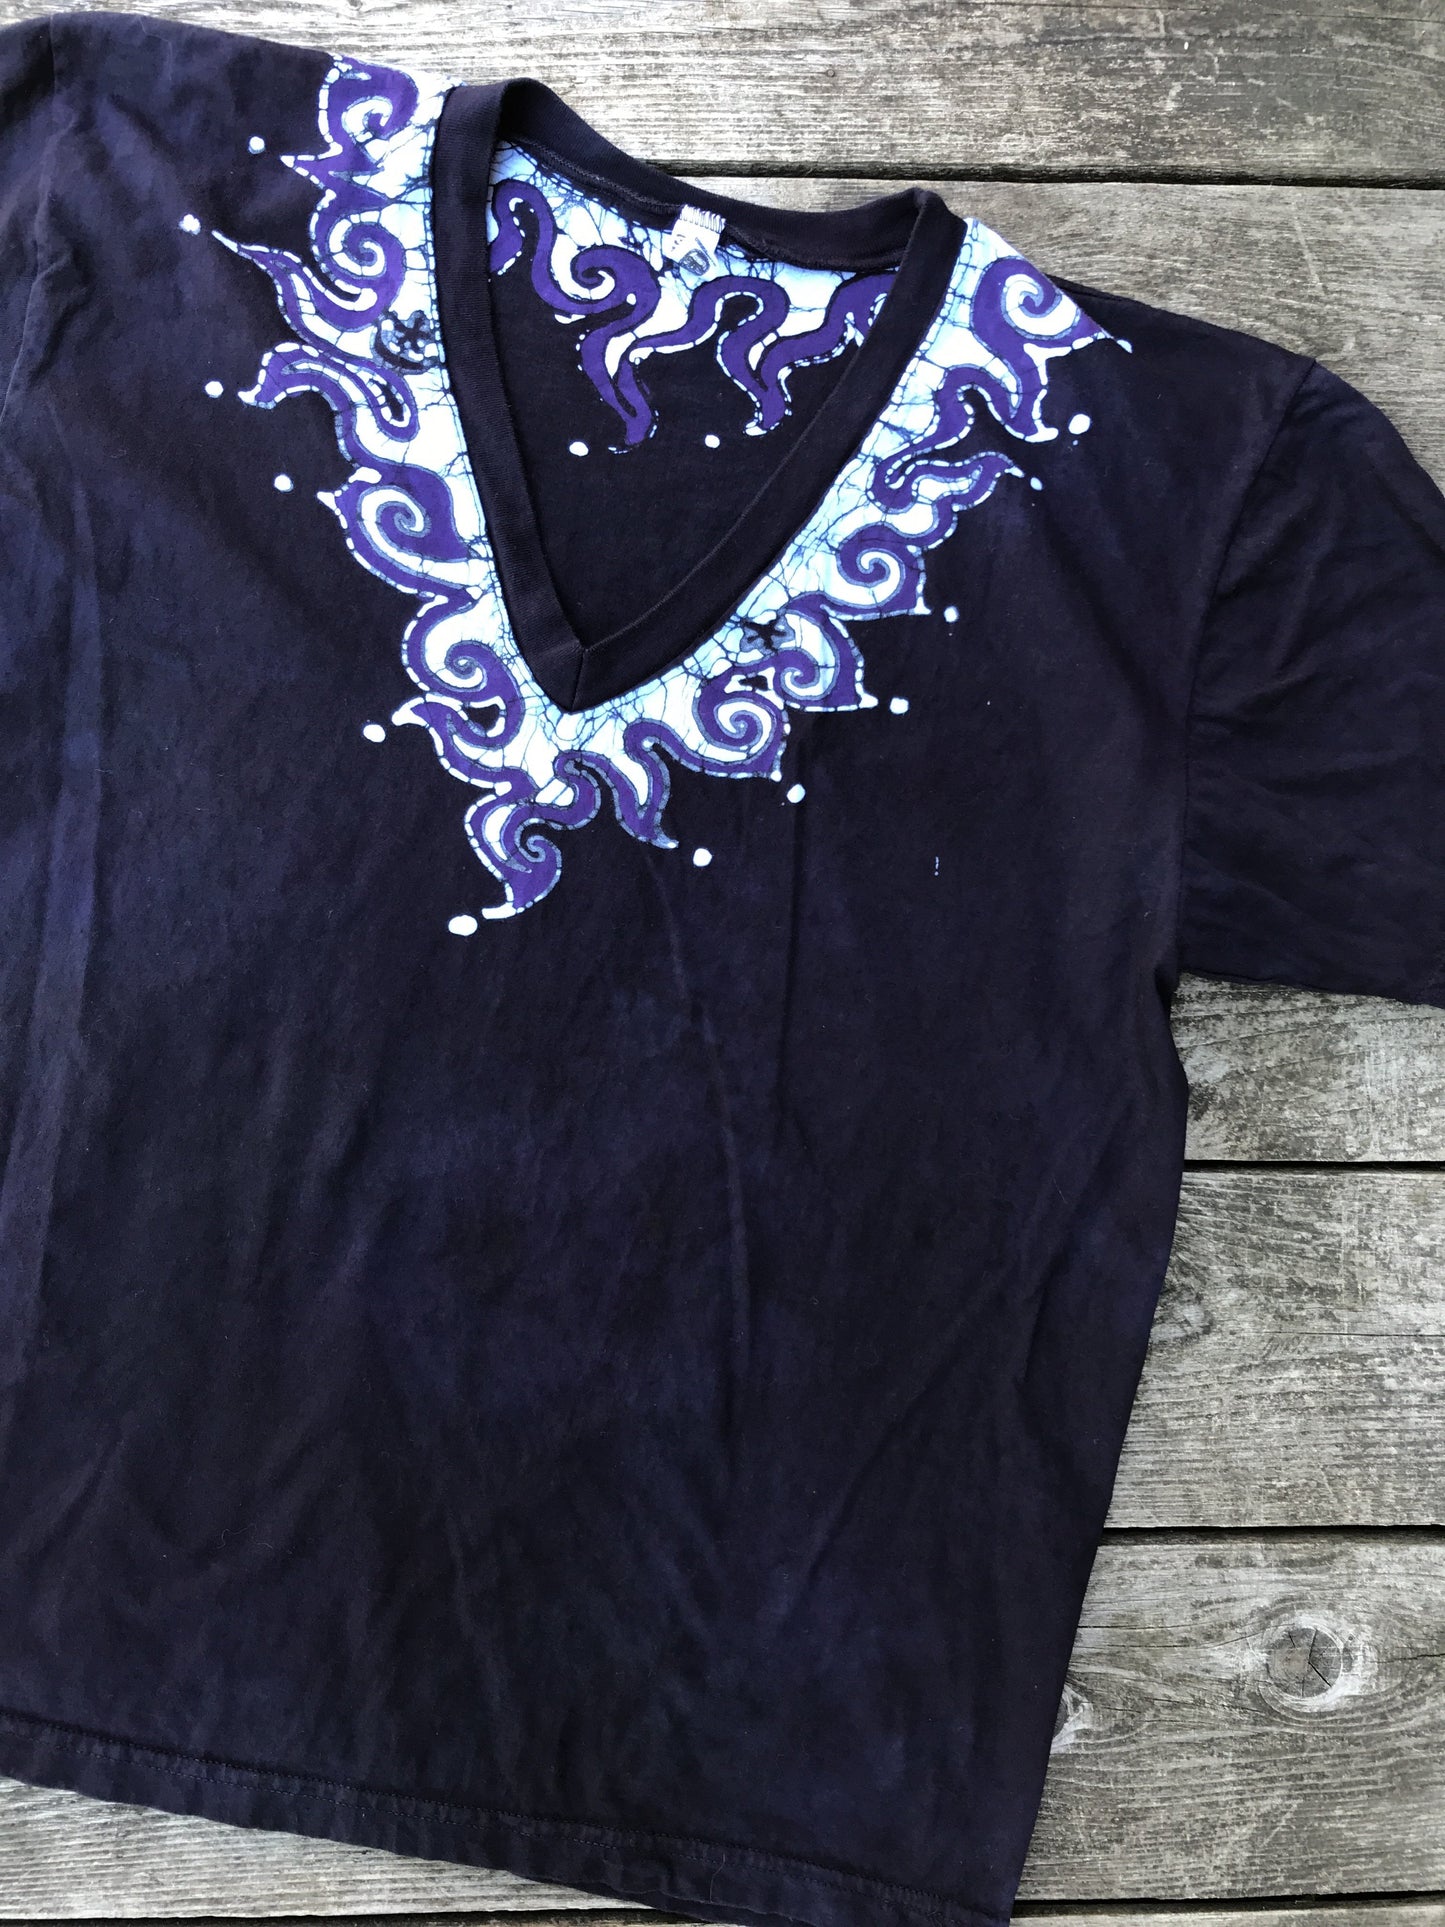 Batik Necklace Organic Cotton Vneck Tshirt in The Deepest Blue With Purple Highlights Tshirts batikwalla Large 